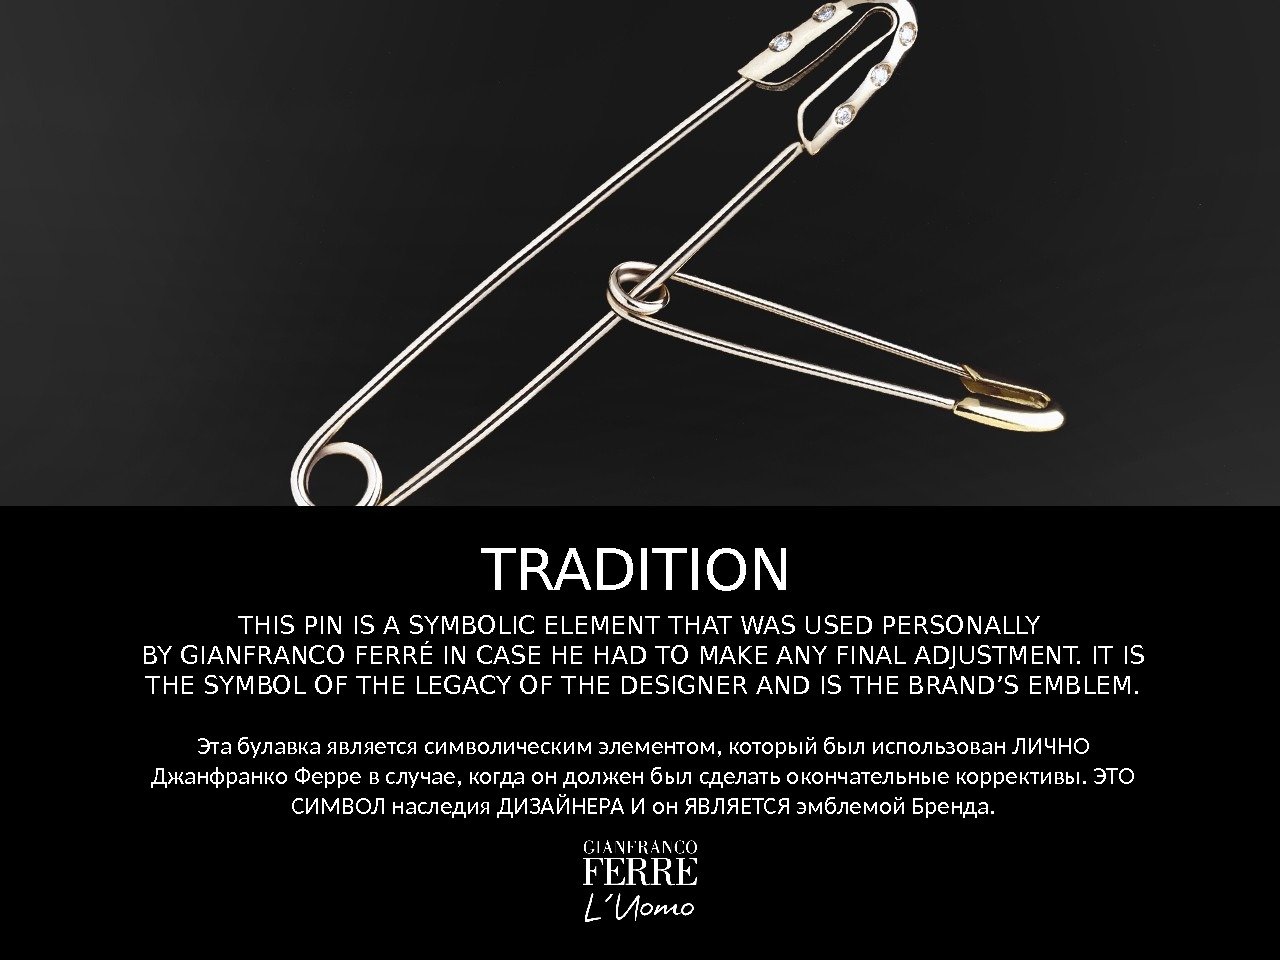 THIS PIN IS A SYMBOLIC ELEMENT THAT WAS USED PERSONALLY BY GIANFRANCO FERRÉ IN